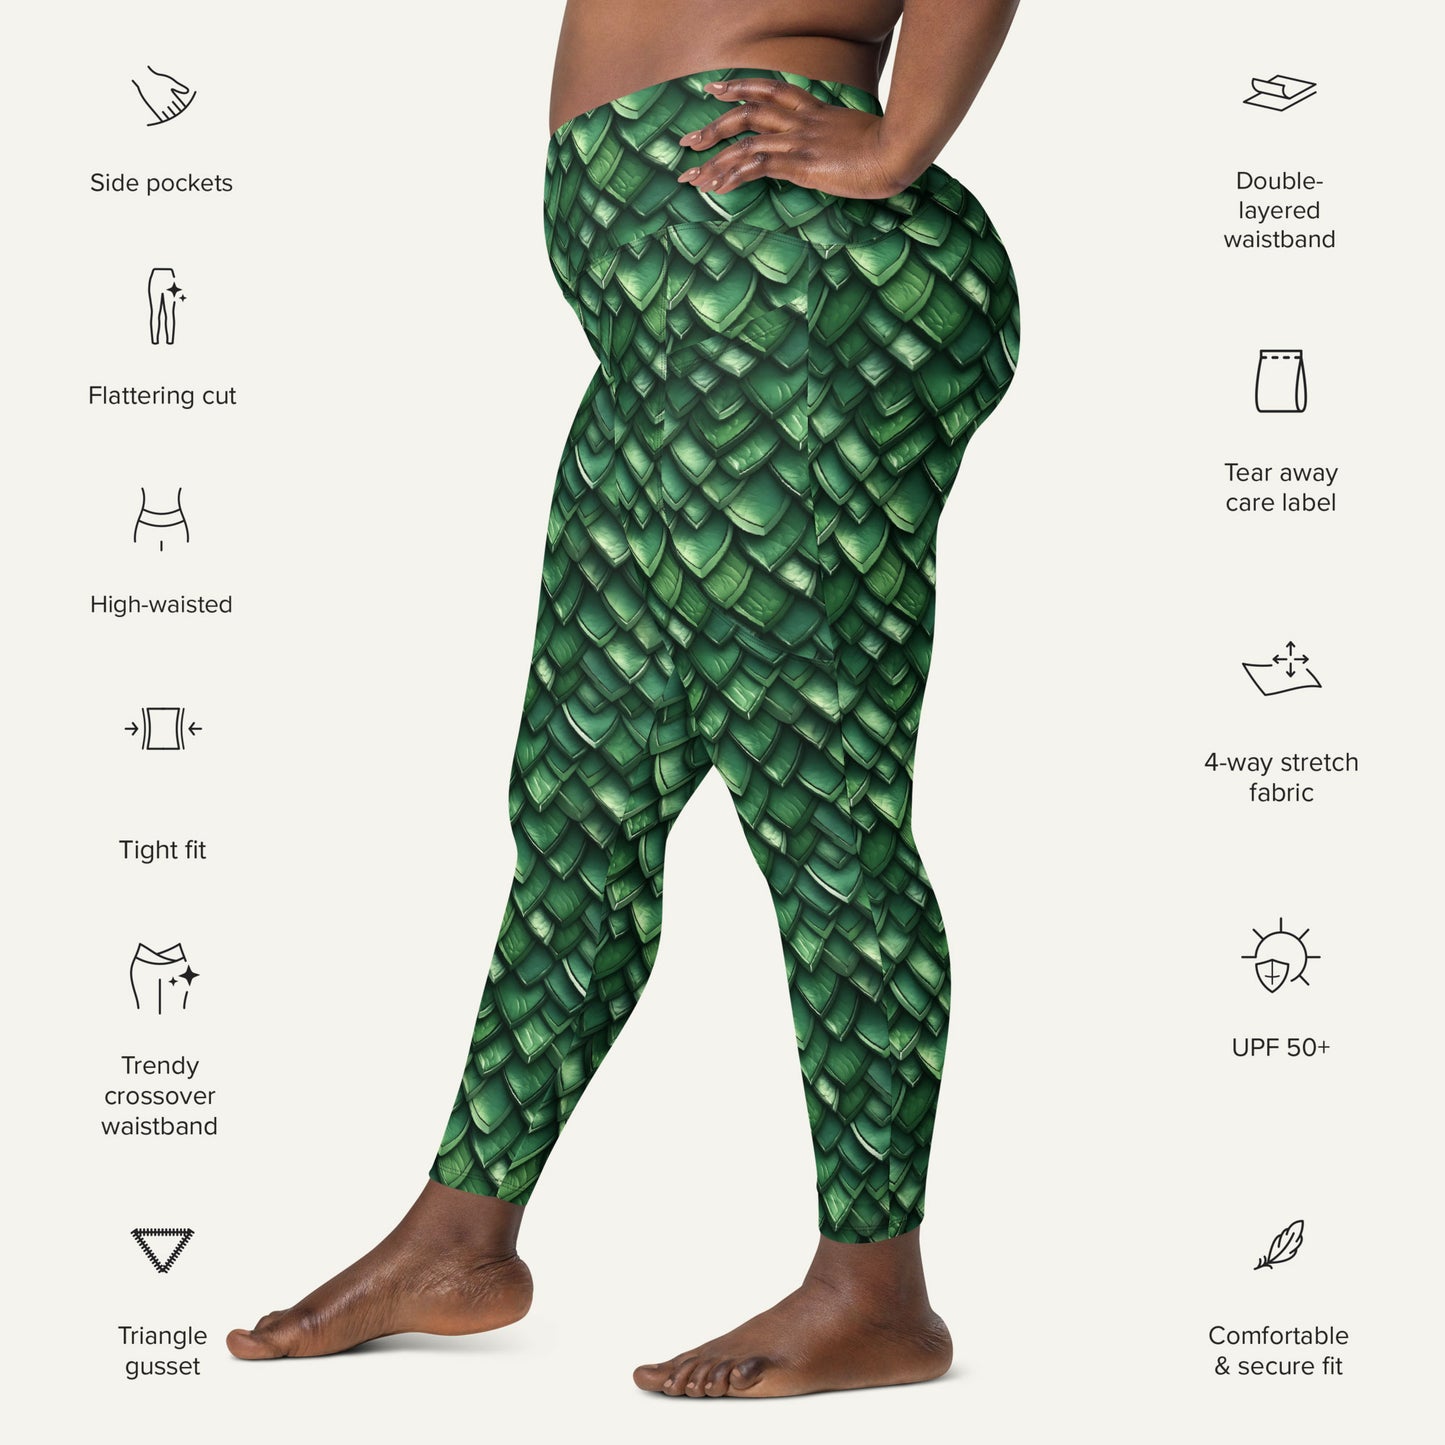 Jade Dragon Scales Crossover Leggings With Pockets